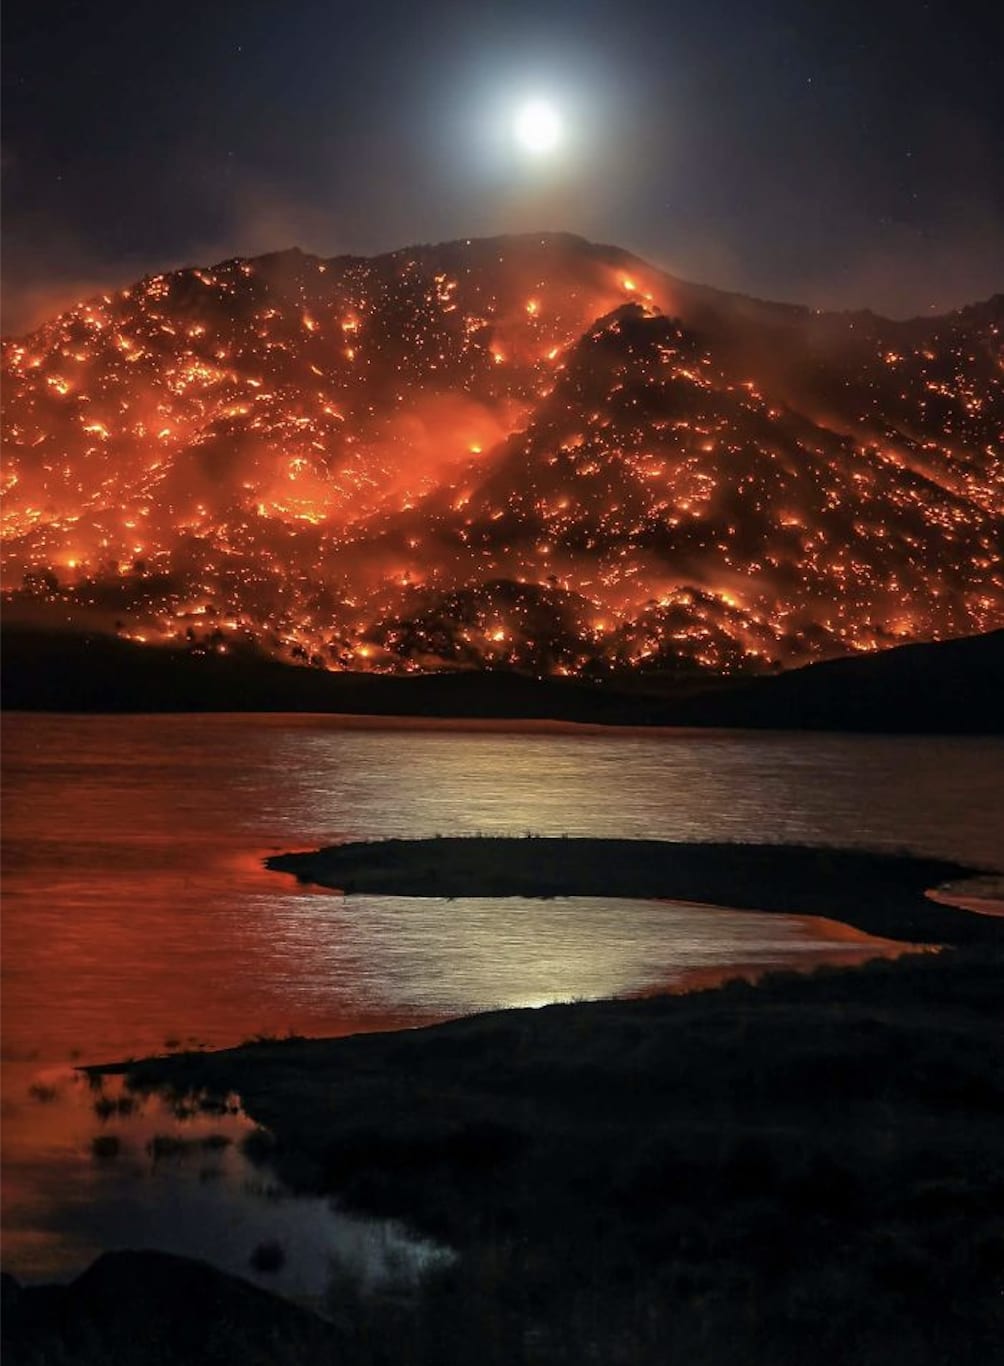 The moon rising over a hill in California that is engulfed in a wildfire looks really eerie.